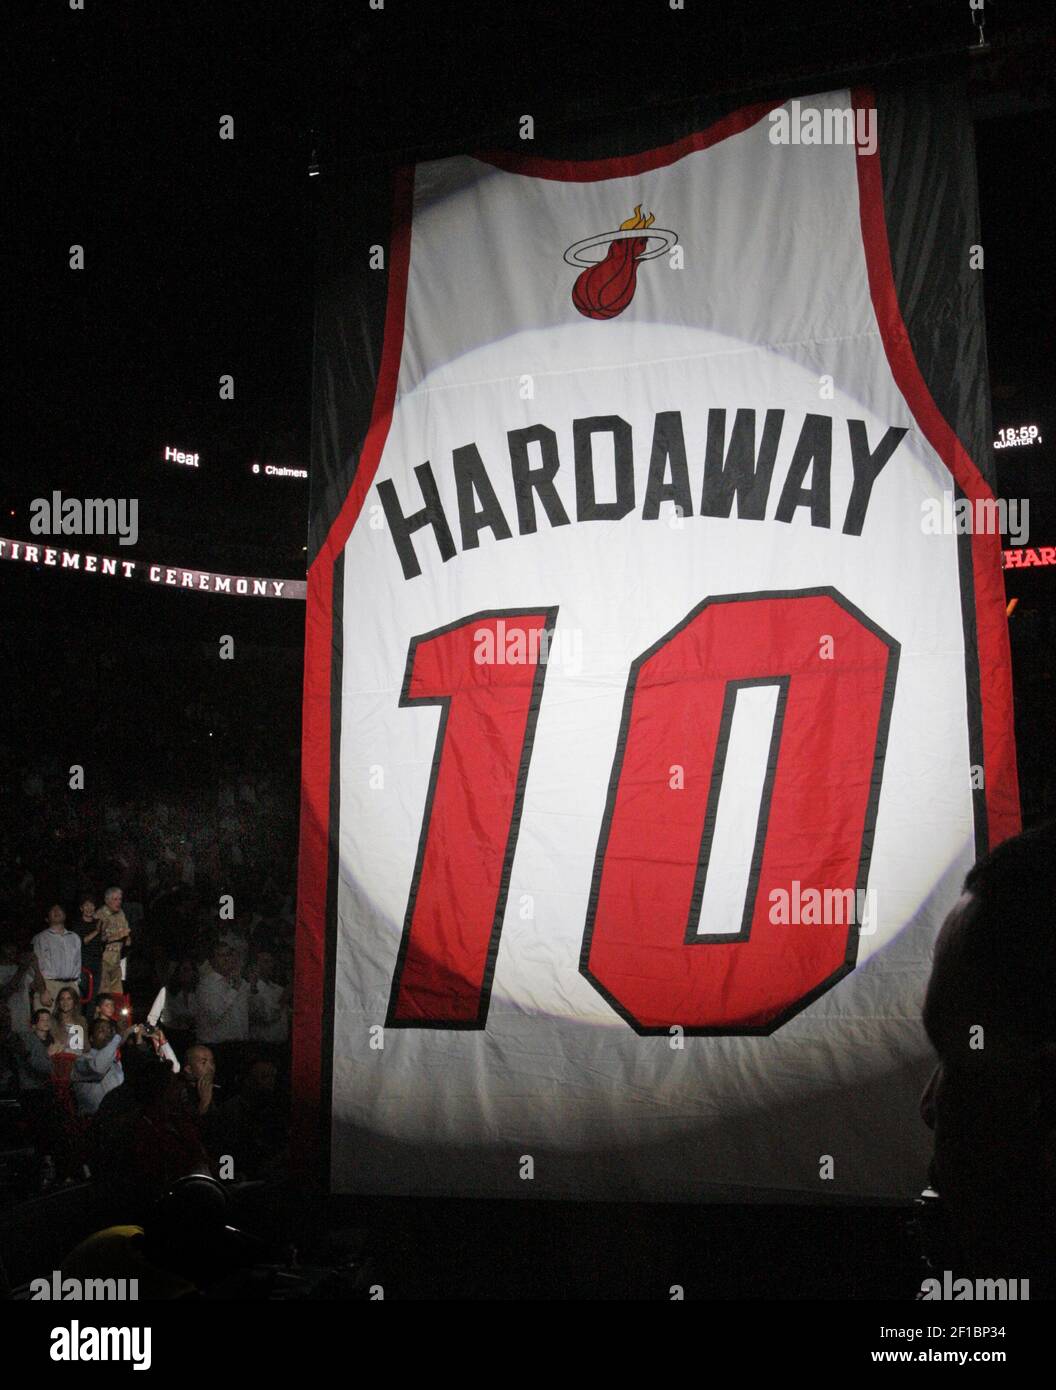 The jersey of former Miami Heat player Tim Hardaway was retired during a  pregame presentation at the American Airlines Arena in Miami, Florida. The  Heat faced the New York Knicks on Wednesday